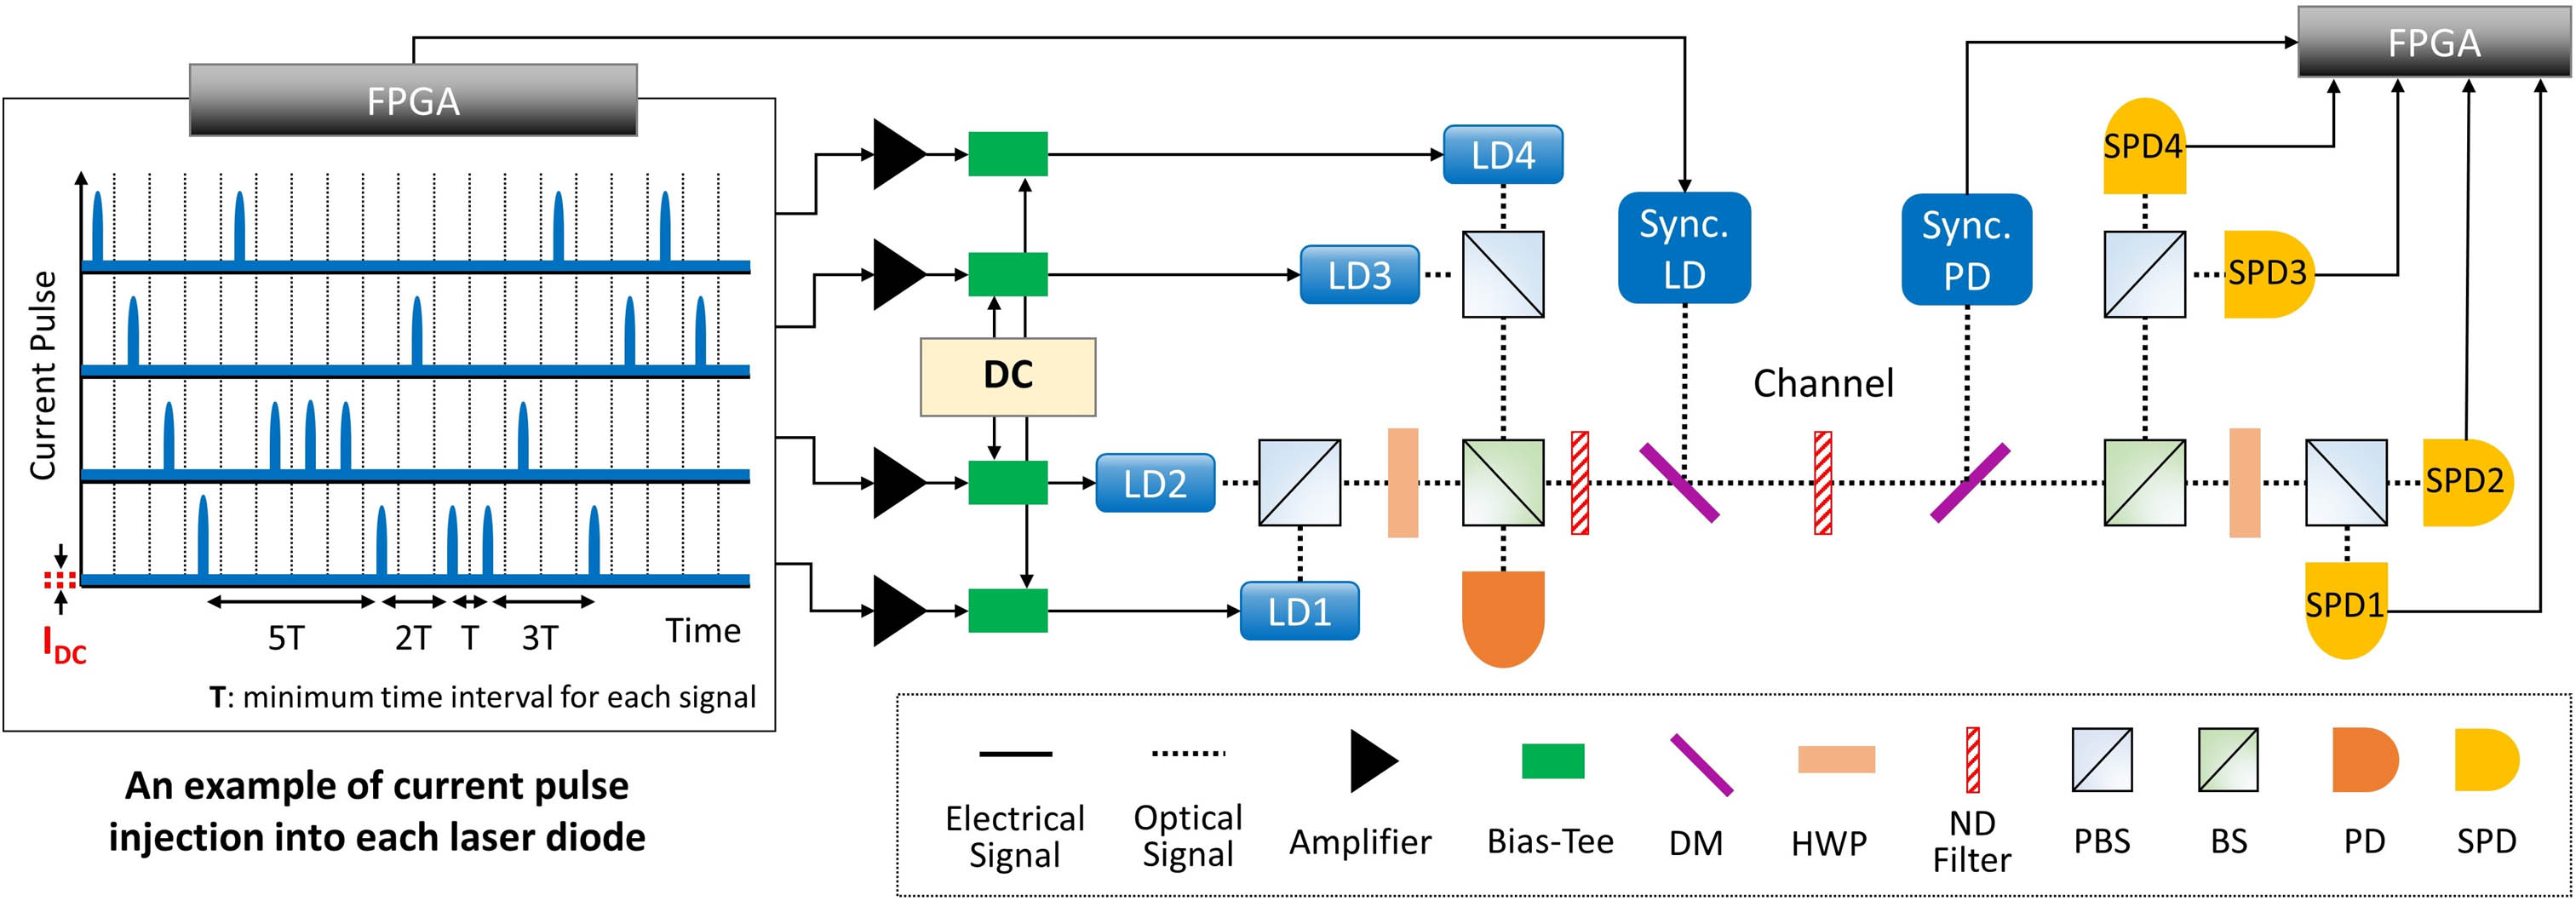 Experimental setup for measuring performance degradation of a polarization-based BB84 QKD system under high DC bias current. An example of aperiodic current signals generated from a FPGA is depicted. FPGA, field-programmable gate array; LD, laser diode; Sync. LD, synchronization laser diode; Sync. PD, synchronization photodiode; DM, dichroic mirror; HWP, half-wave plate; ND filter, neutral density filter; PBS, polarization beam splitter; BS, beam splitter; PD, photodetector; SPD, single photon detector.